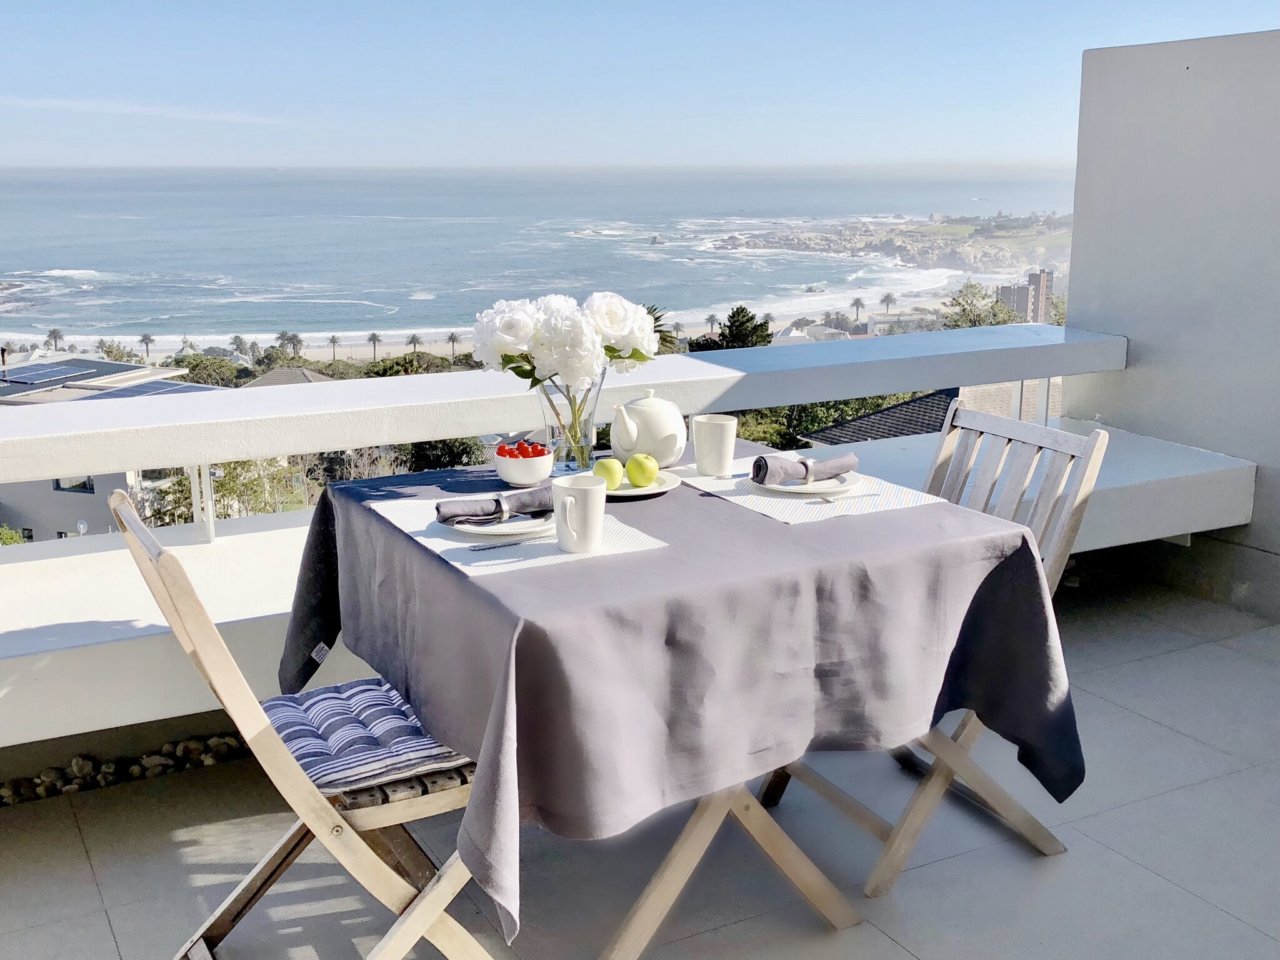 Photo 9 of Aqua Penthouse accommodation in Camps Bay, Cape Town with 2 bedrooms and 2 bathrooms